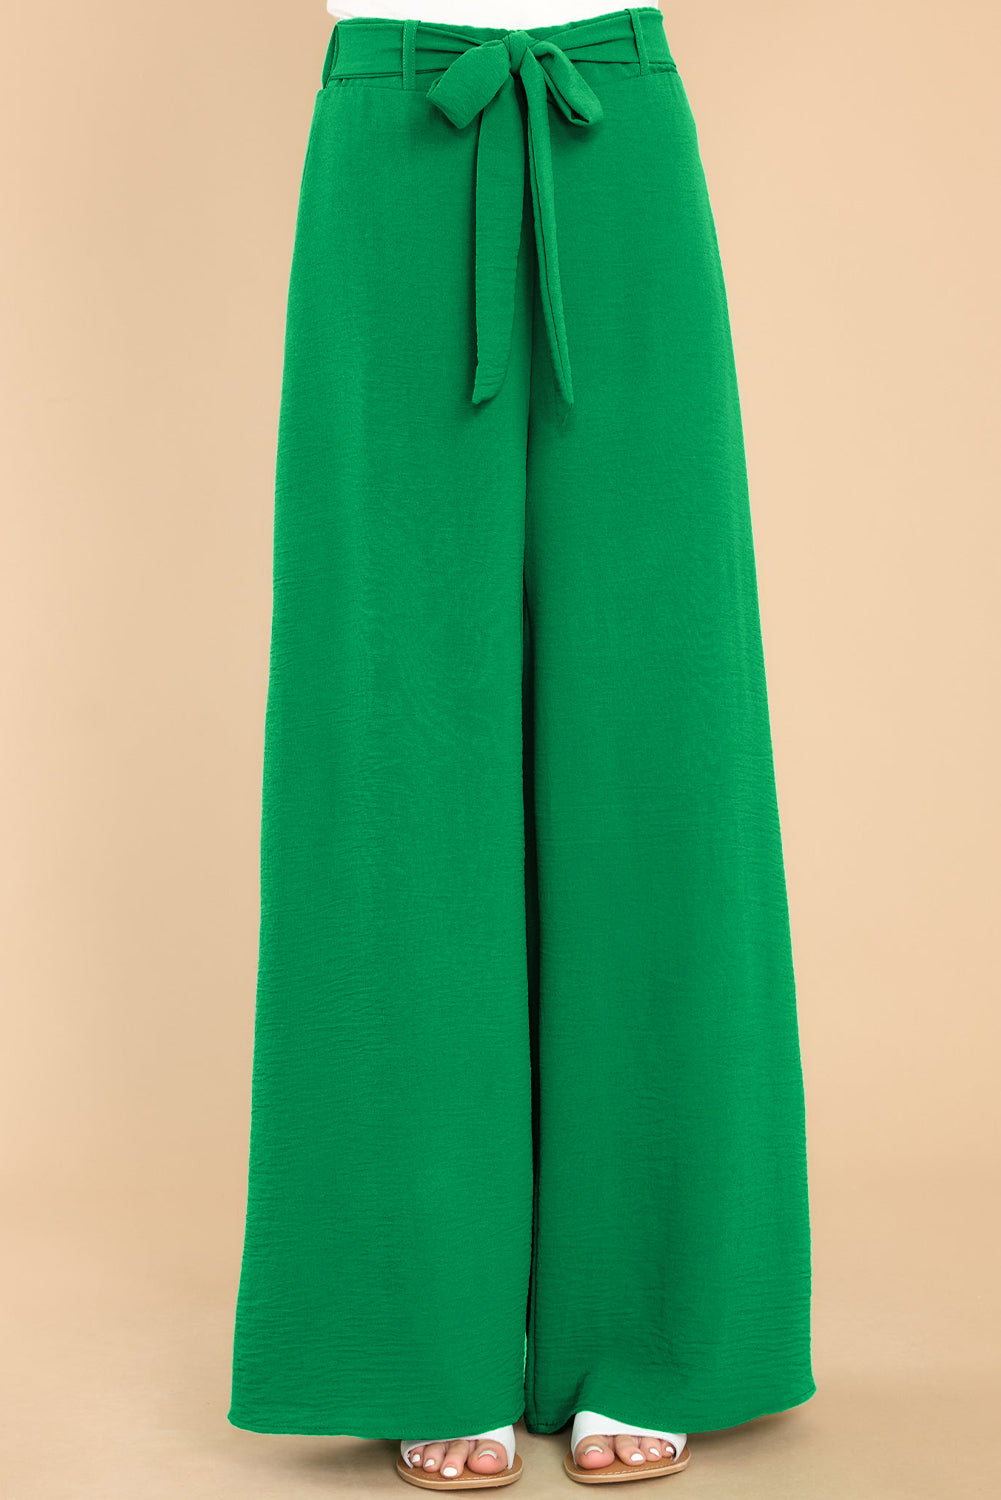 Bright Green High Waist Loops Belted Wide Leg Pants